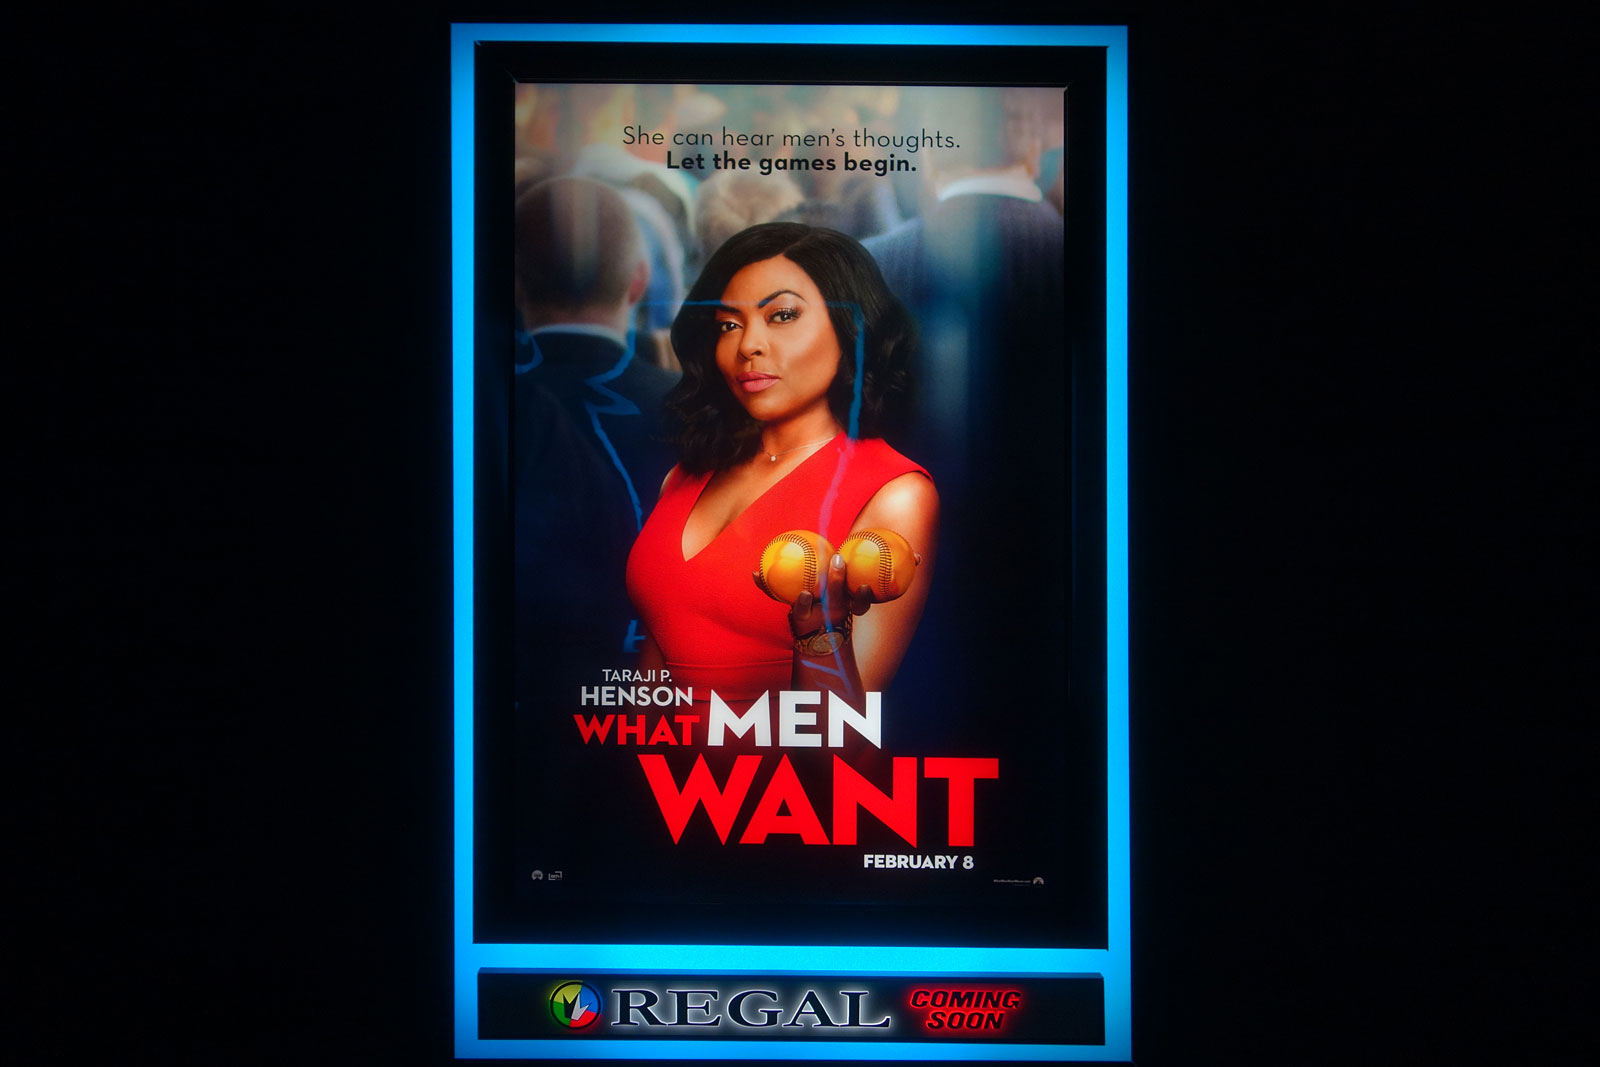 "What Men Want" poster at Regal in Culver Ridge Plaza